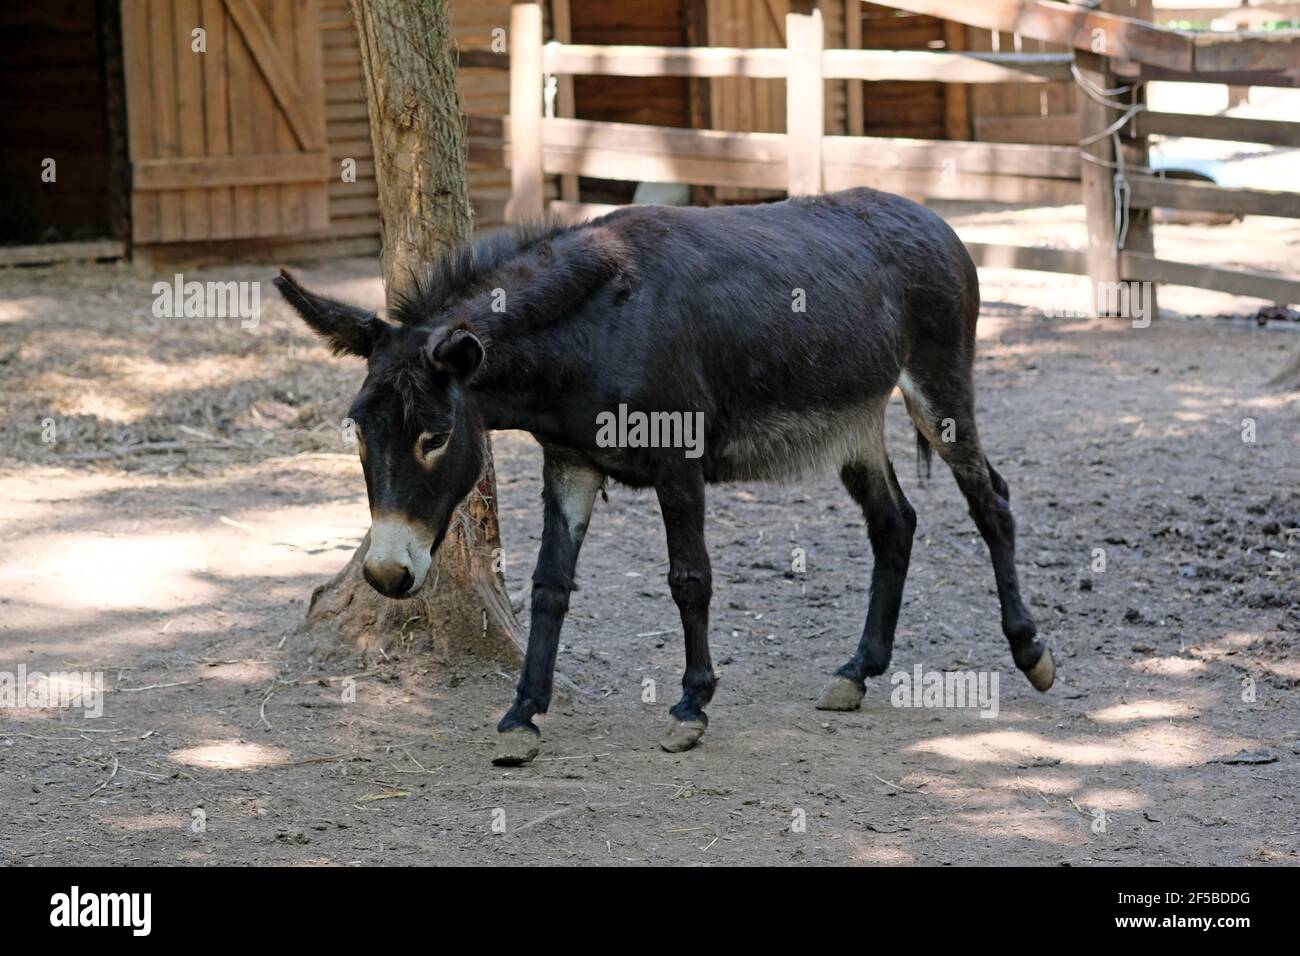 A black donkey walks on the ground in the zoo. A small donkey with long  hair in autumn Stock Photo - Alamy